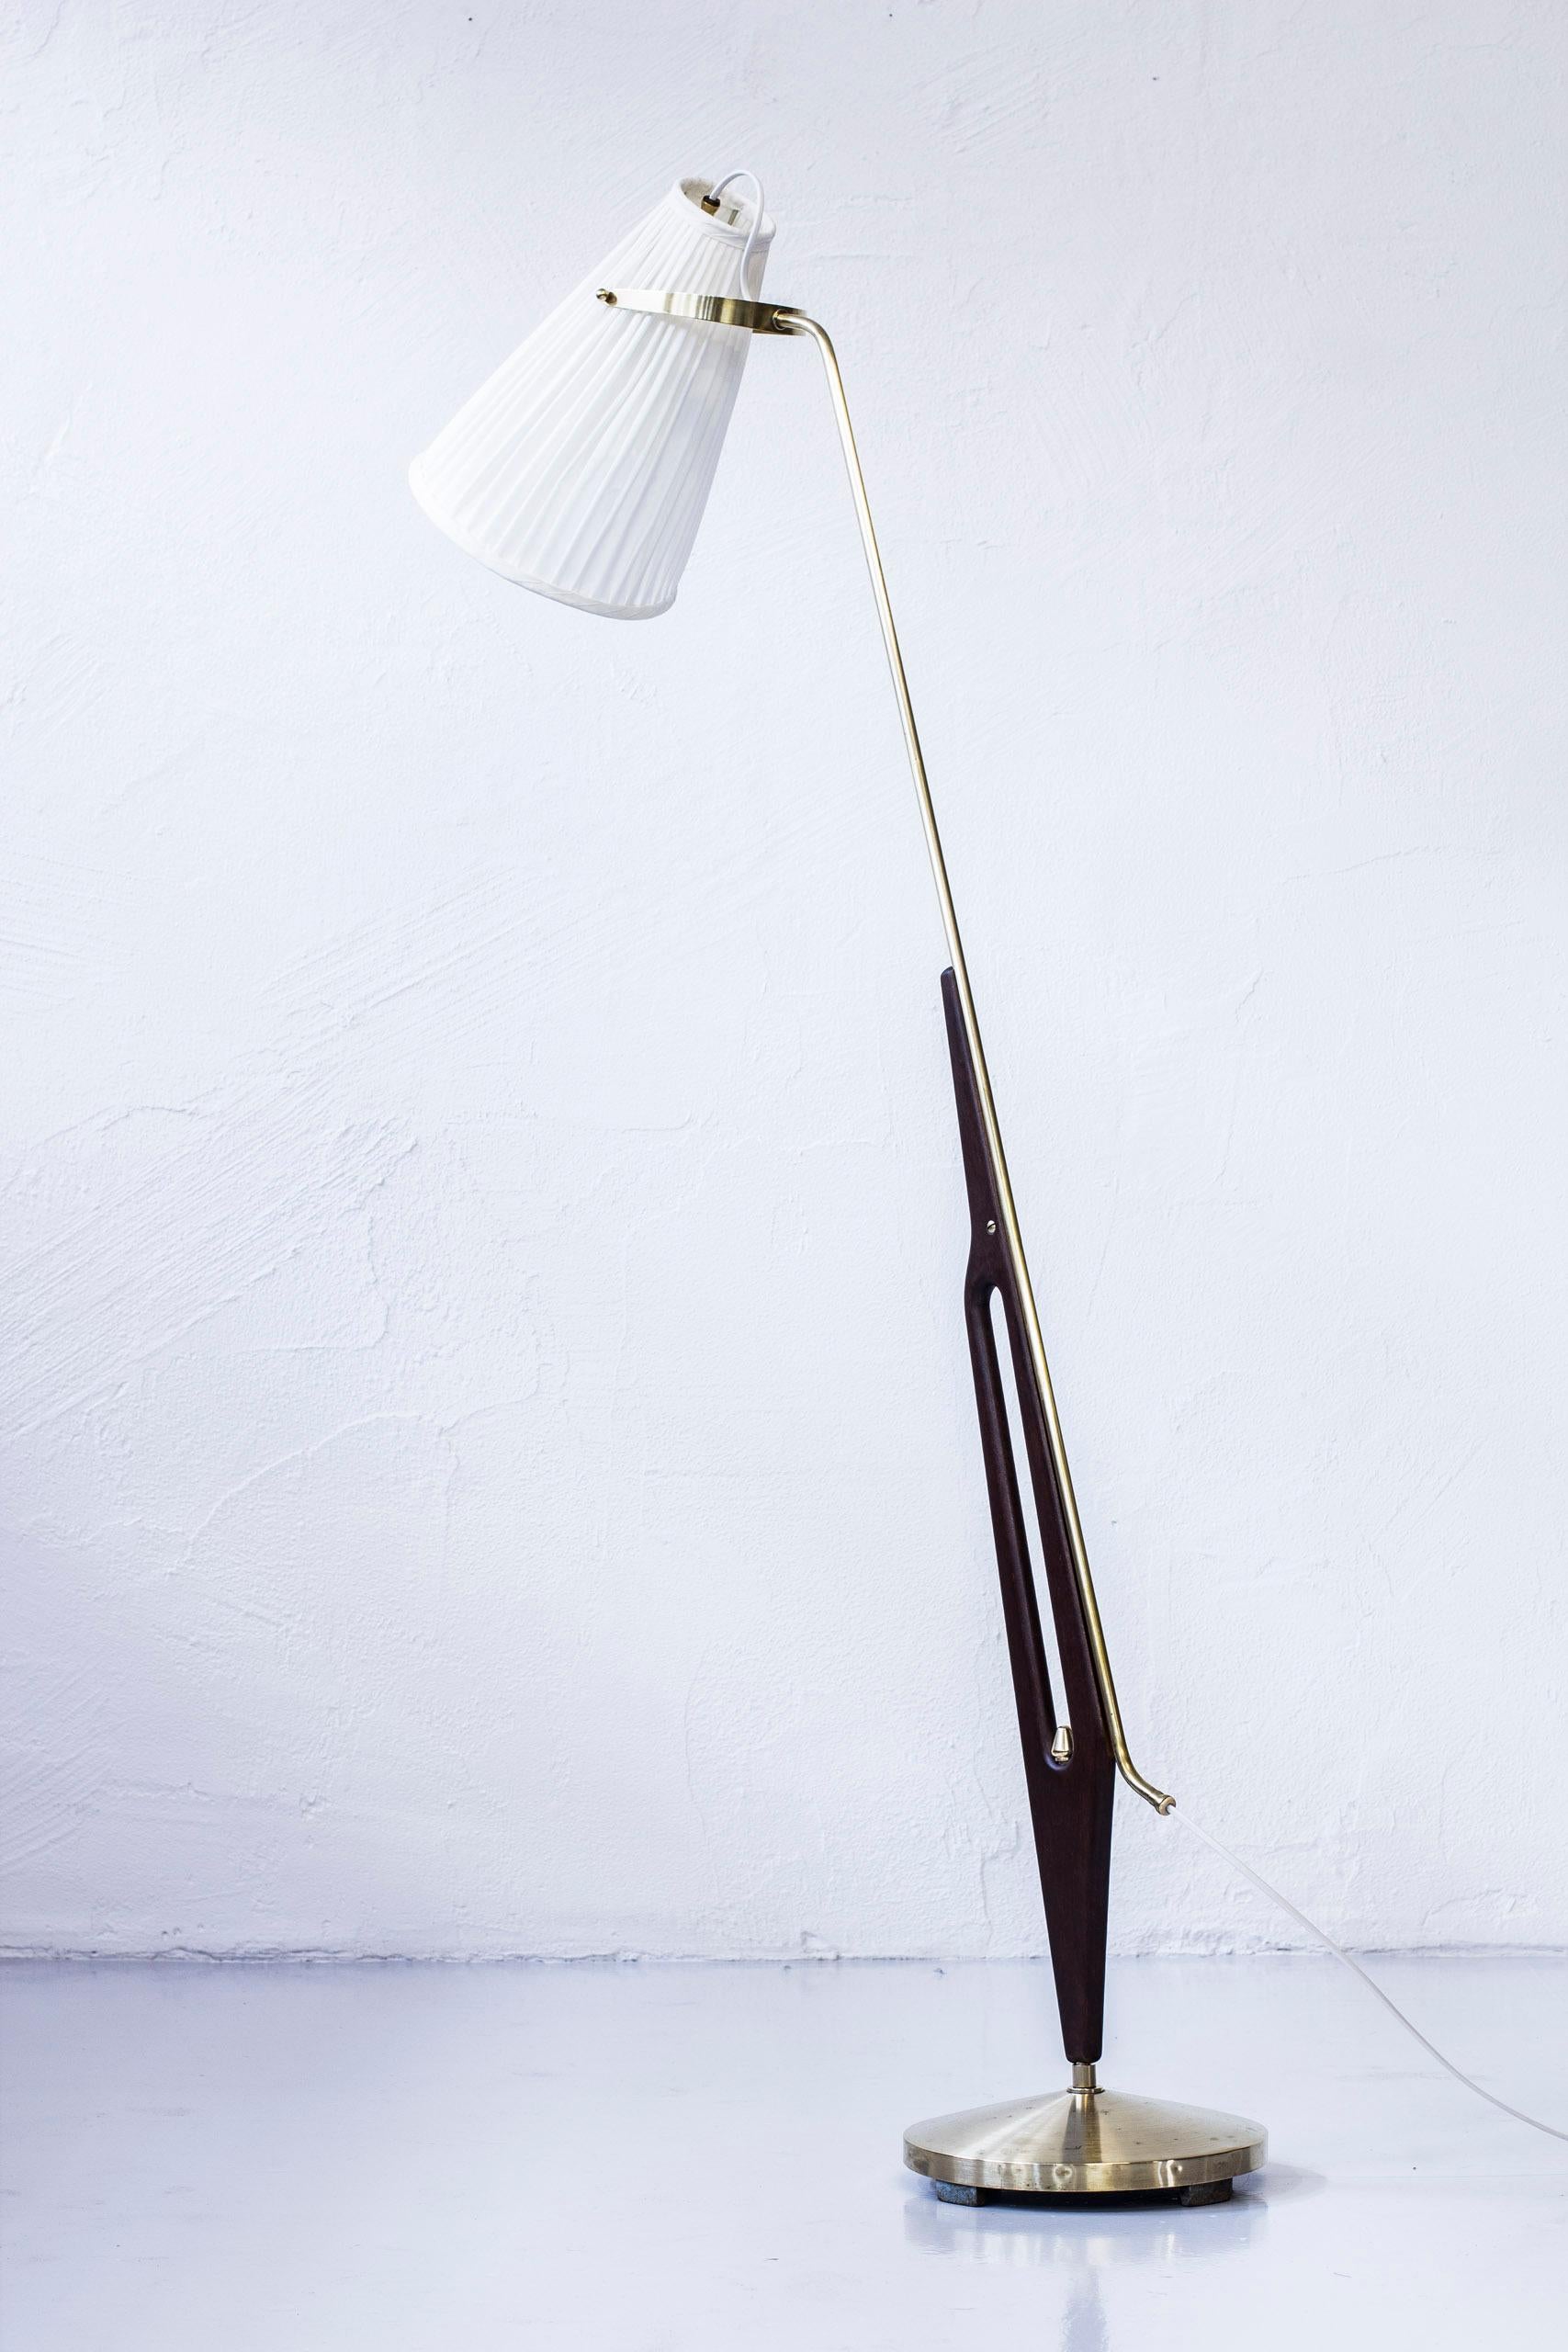 Rare floor lamp designed by Hans Bergström. Produced by ASEA in Sweden during the early 1950s. Made from brass, with a solid mahogany in the main part and hand sewn chintz fabric shade. Light switch on the chord. Very good condition with signs of